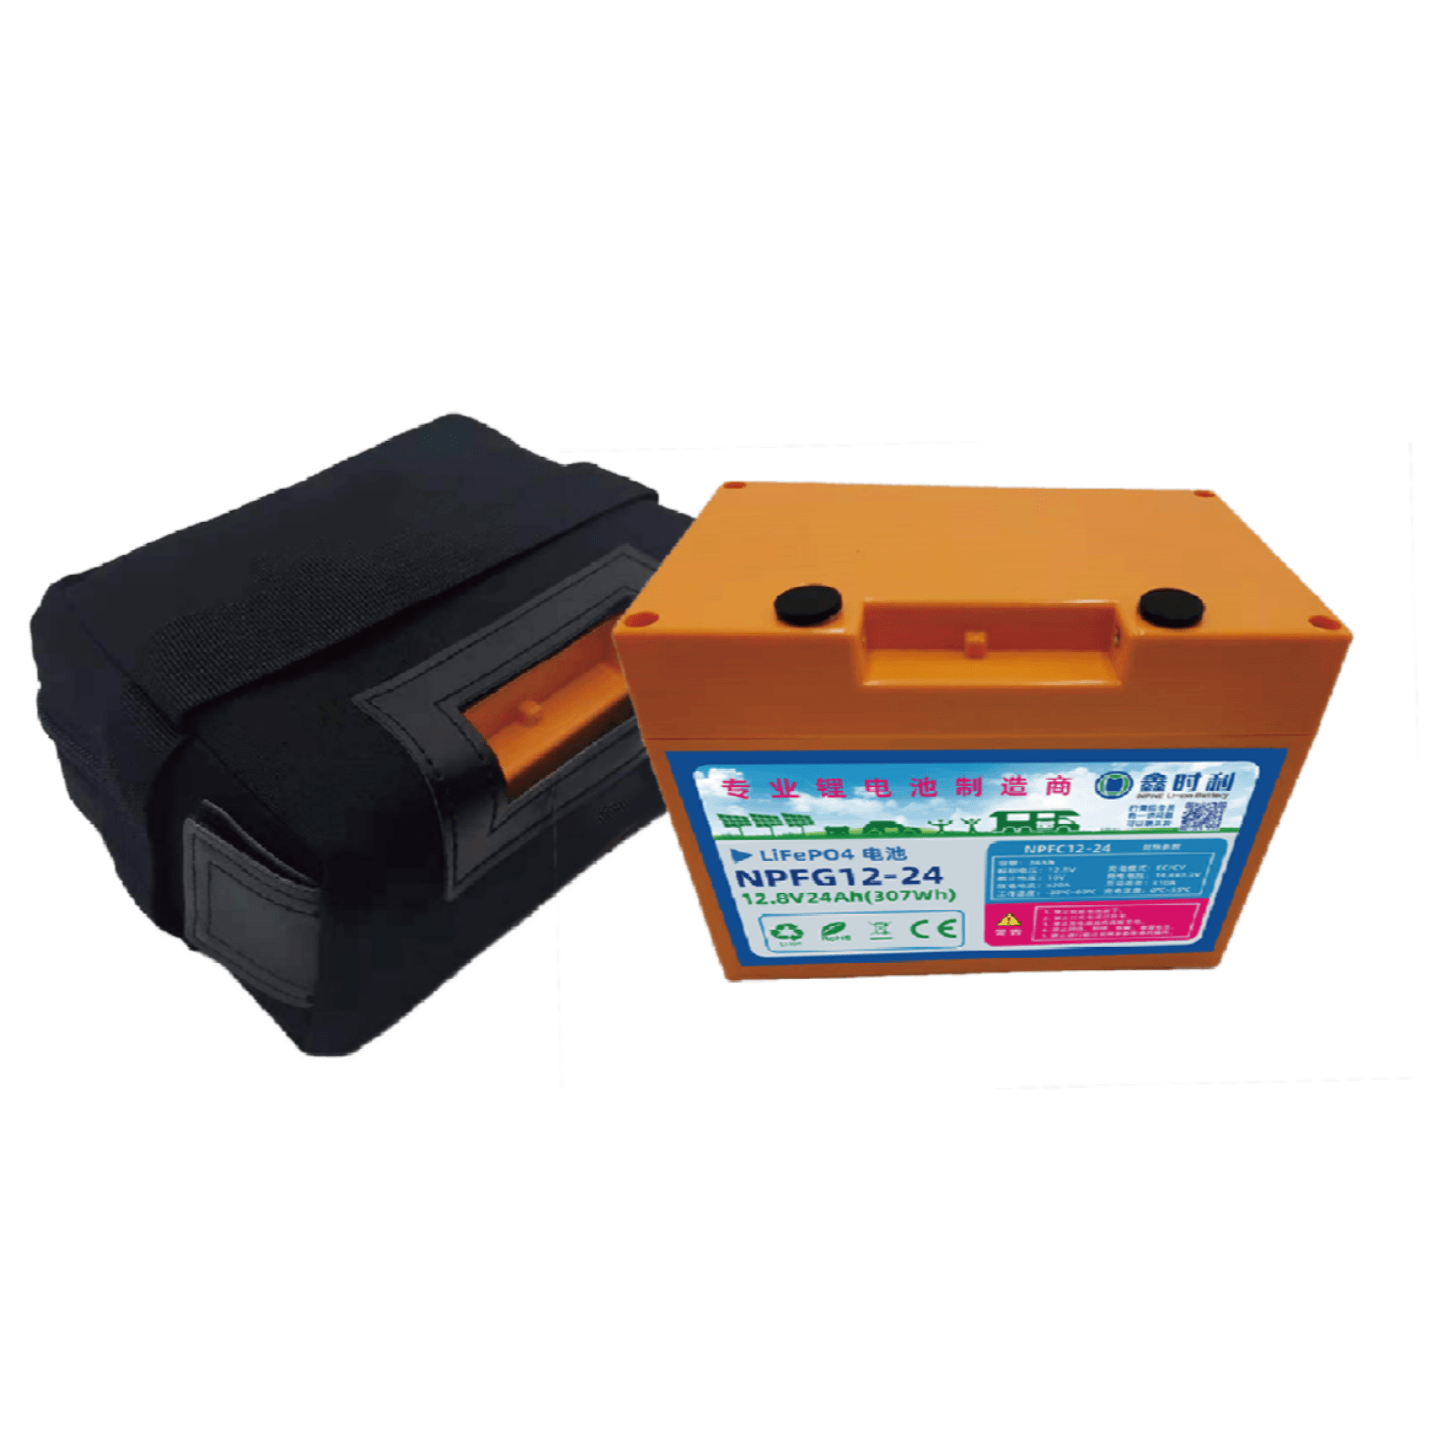 12v 24AH high discharged 30A LifeP04 safety battery & charger for electric golf trolley